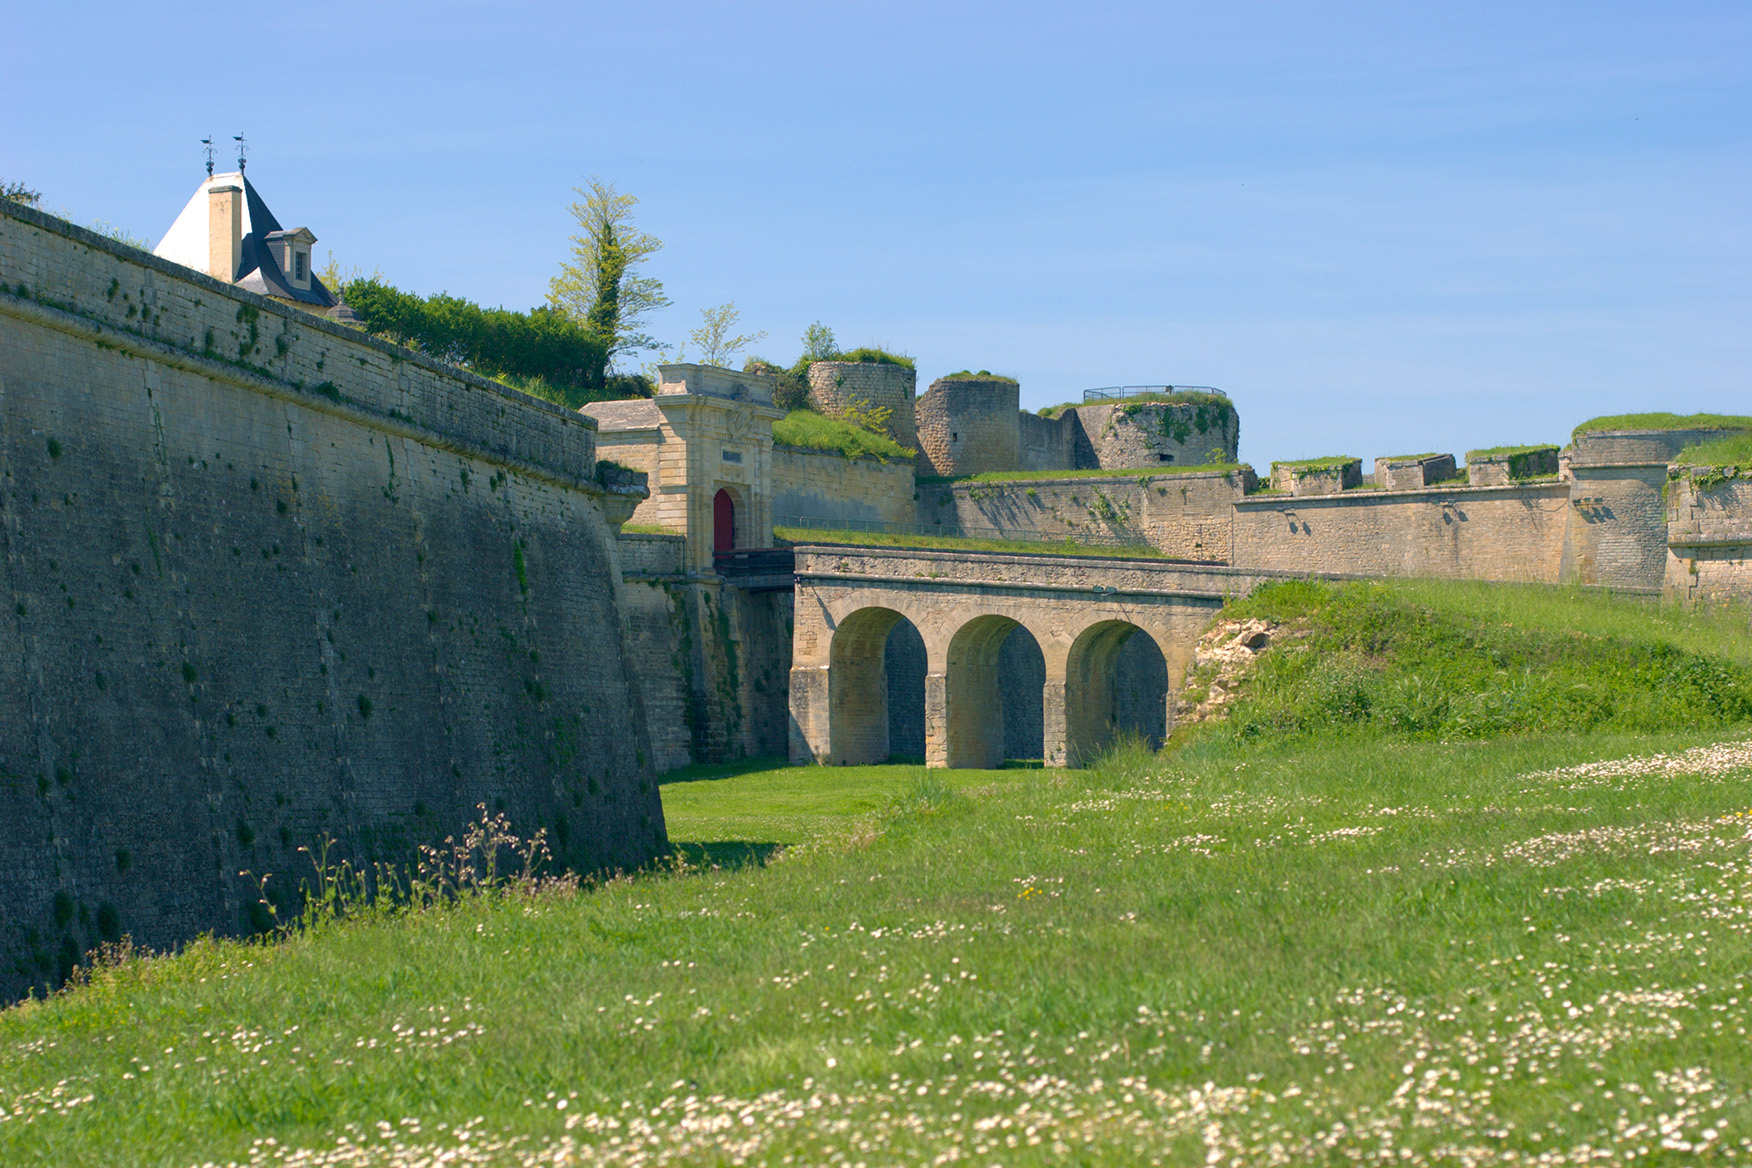 Blaye Citadel © Olivier Aumage - licence [CC BY-SA 2.0 fr] from Wikimedia Commons